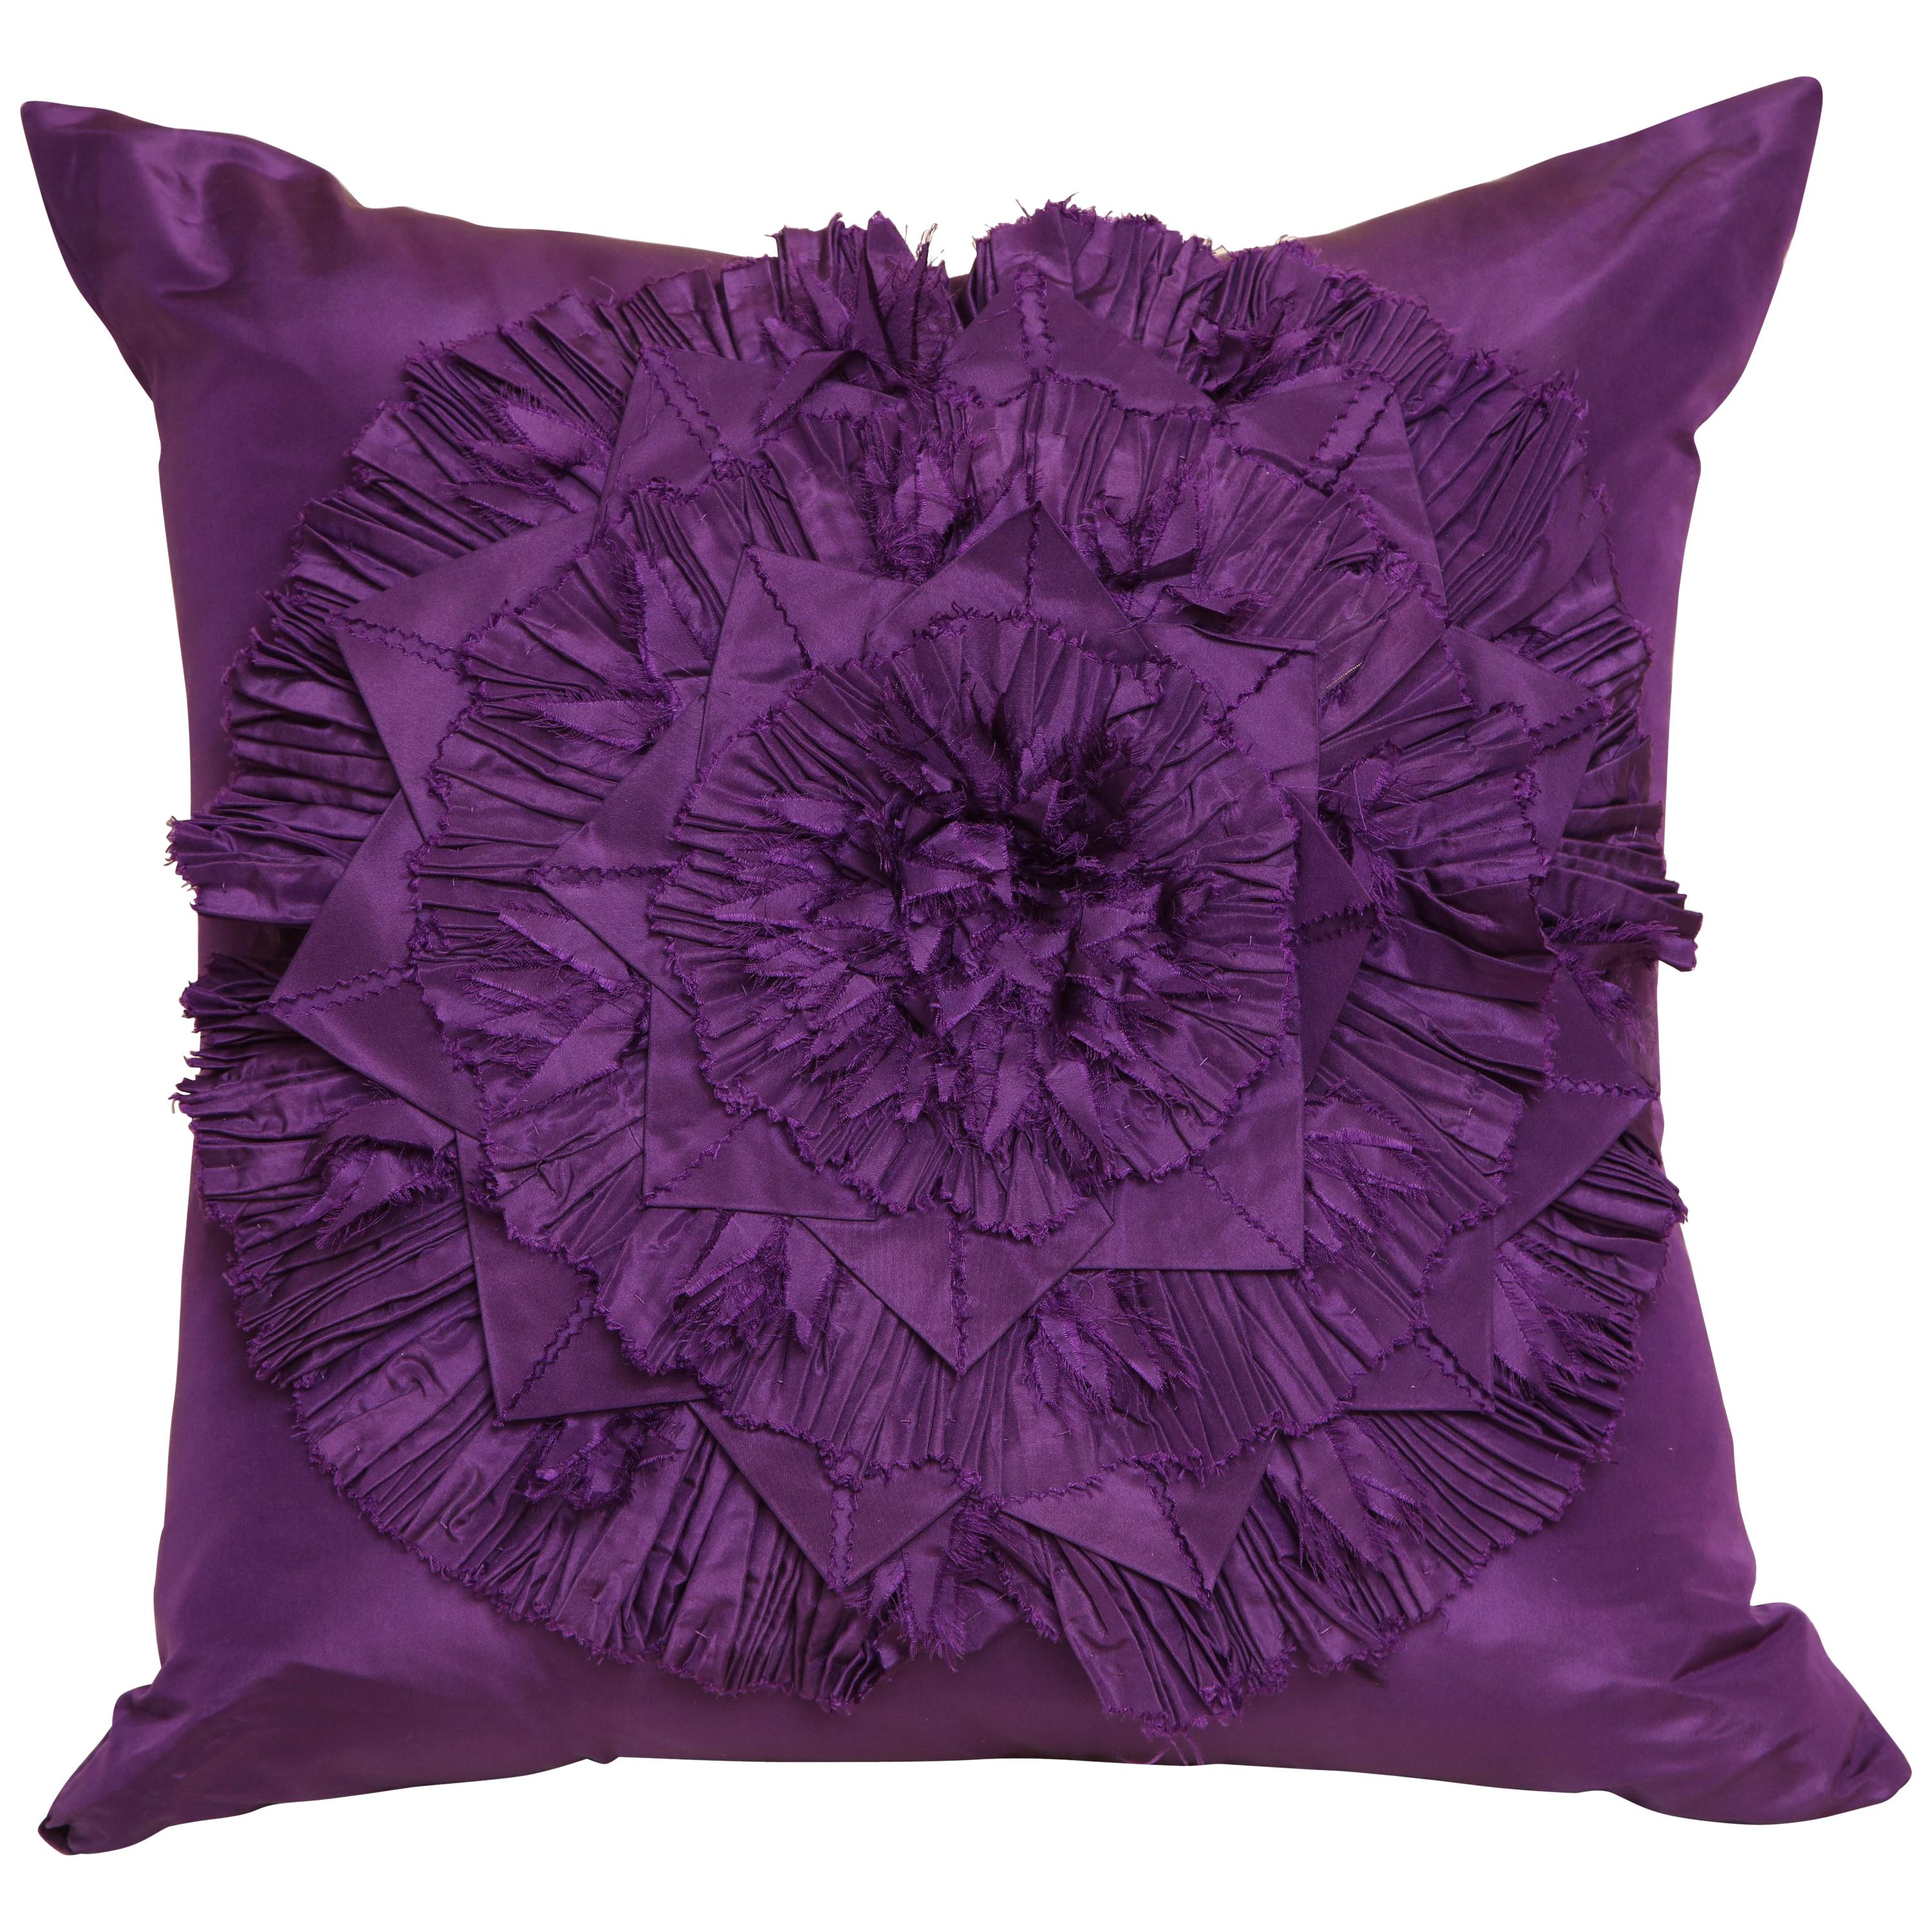 Lili Piazza Large Modern Purple Distressed Floral Pillow For Sale